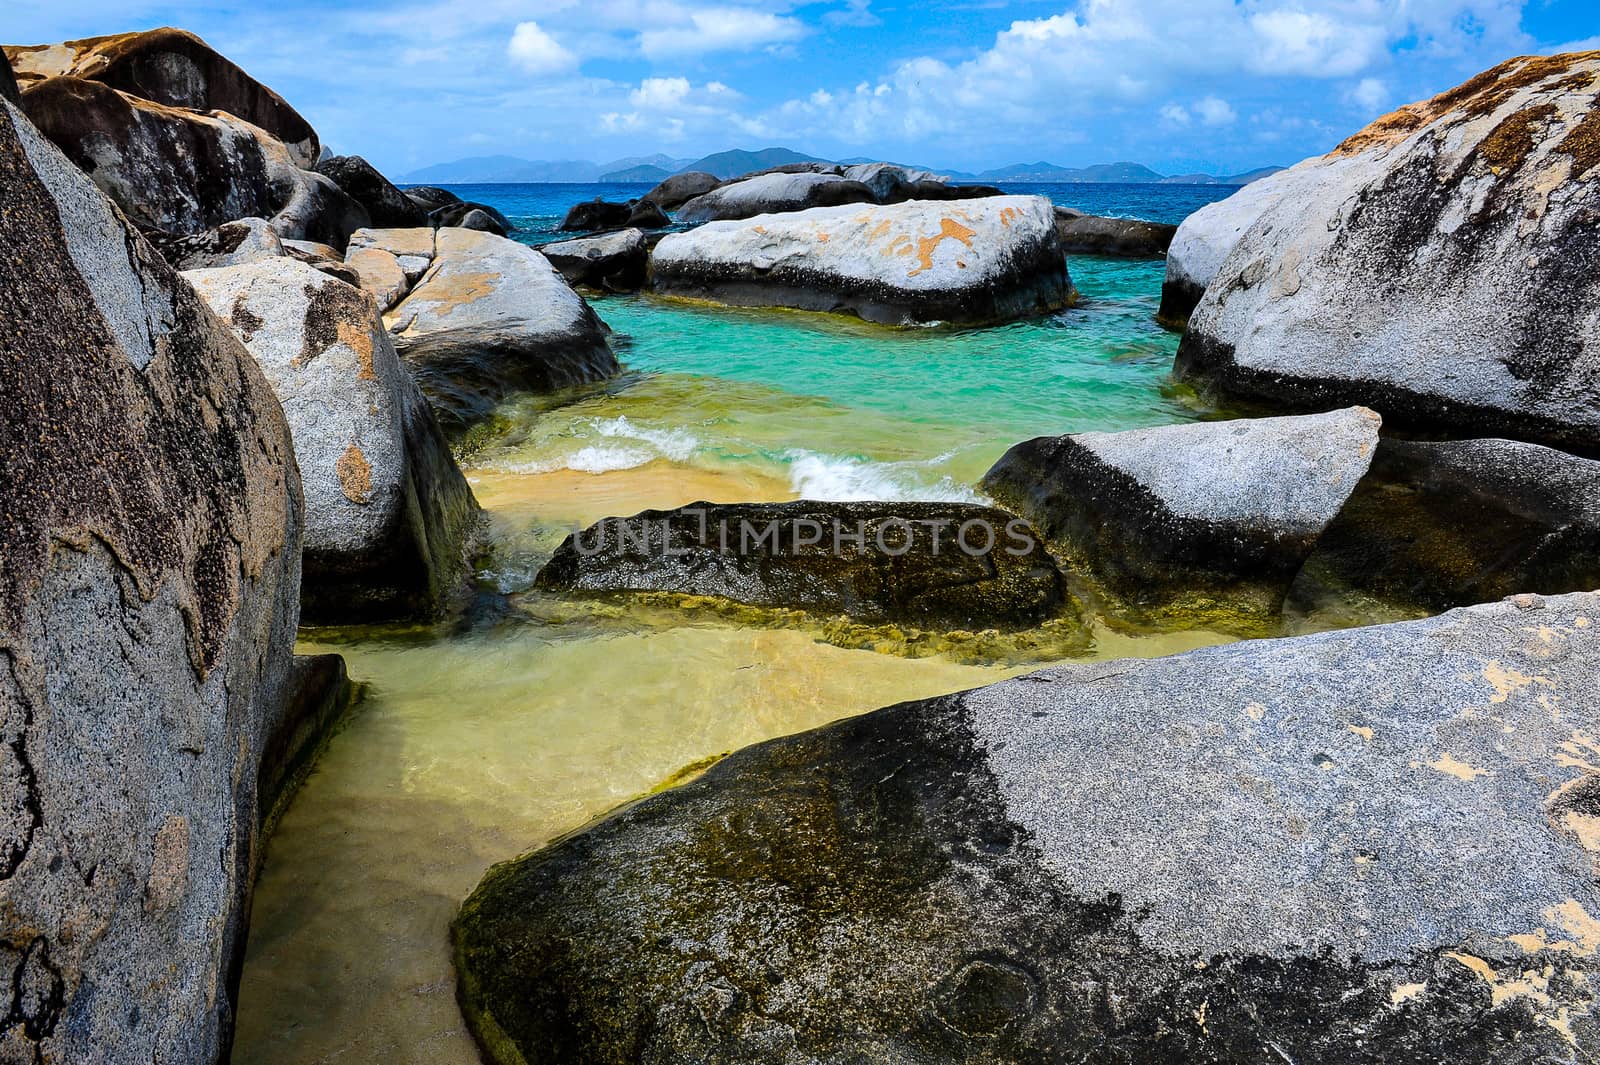 An amazing colours from yellow to turquoise of the beaches of Virgin Gorda in contrast with the blue sky and the rocks